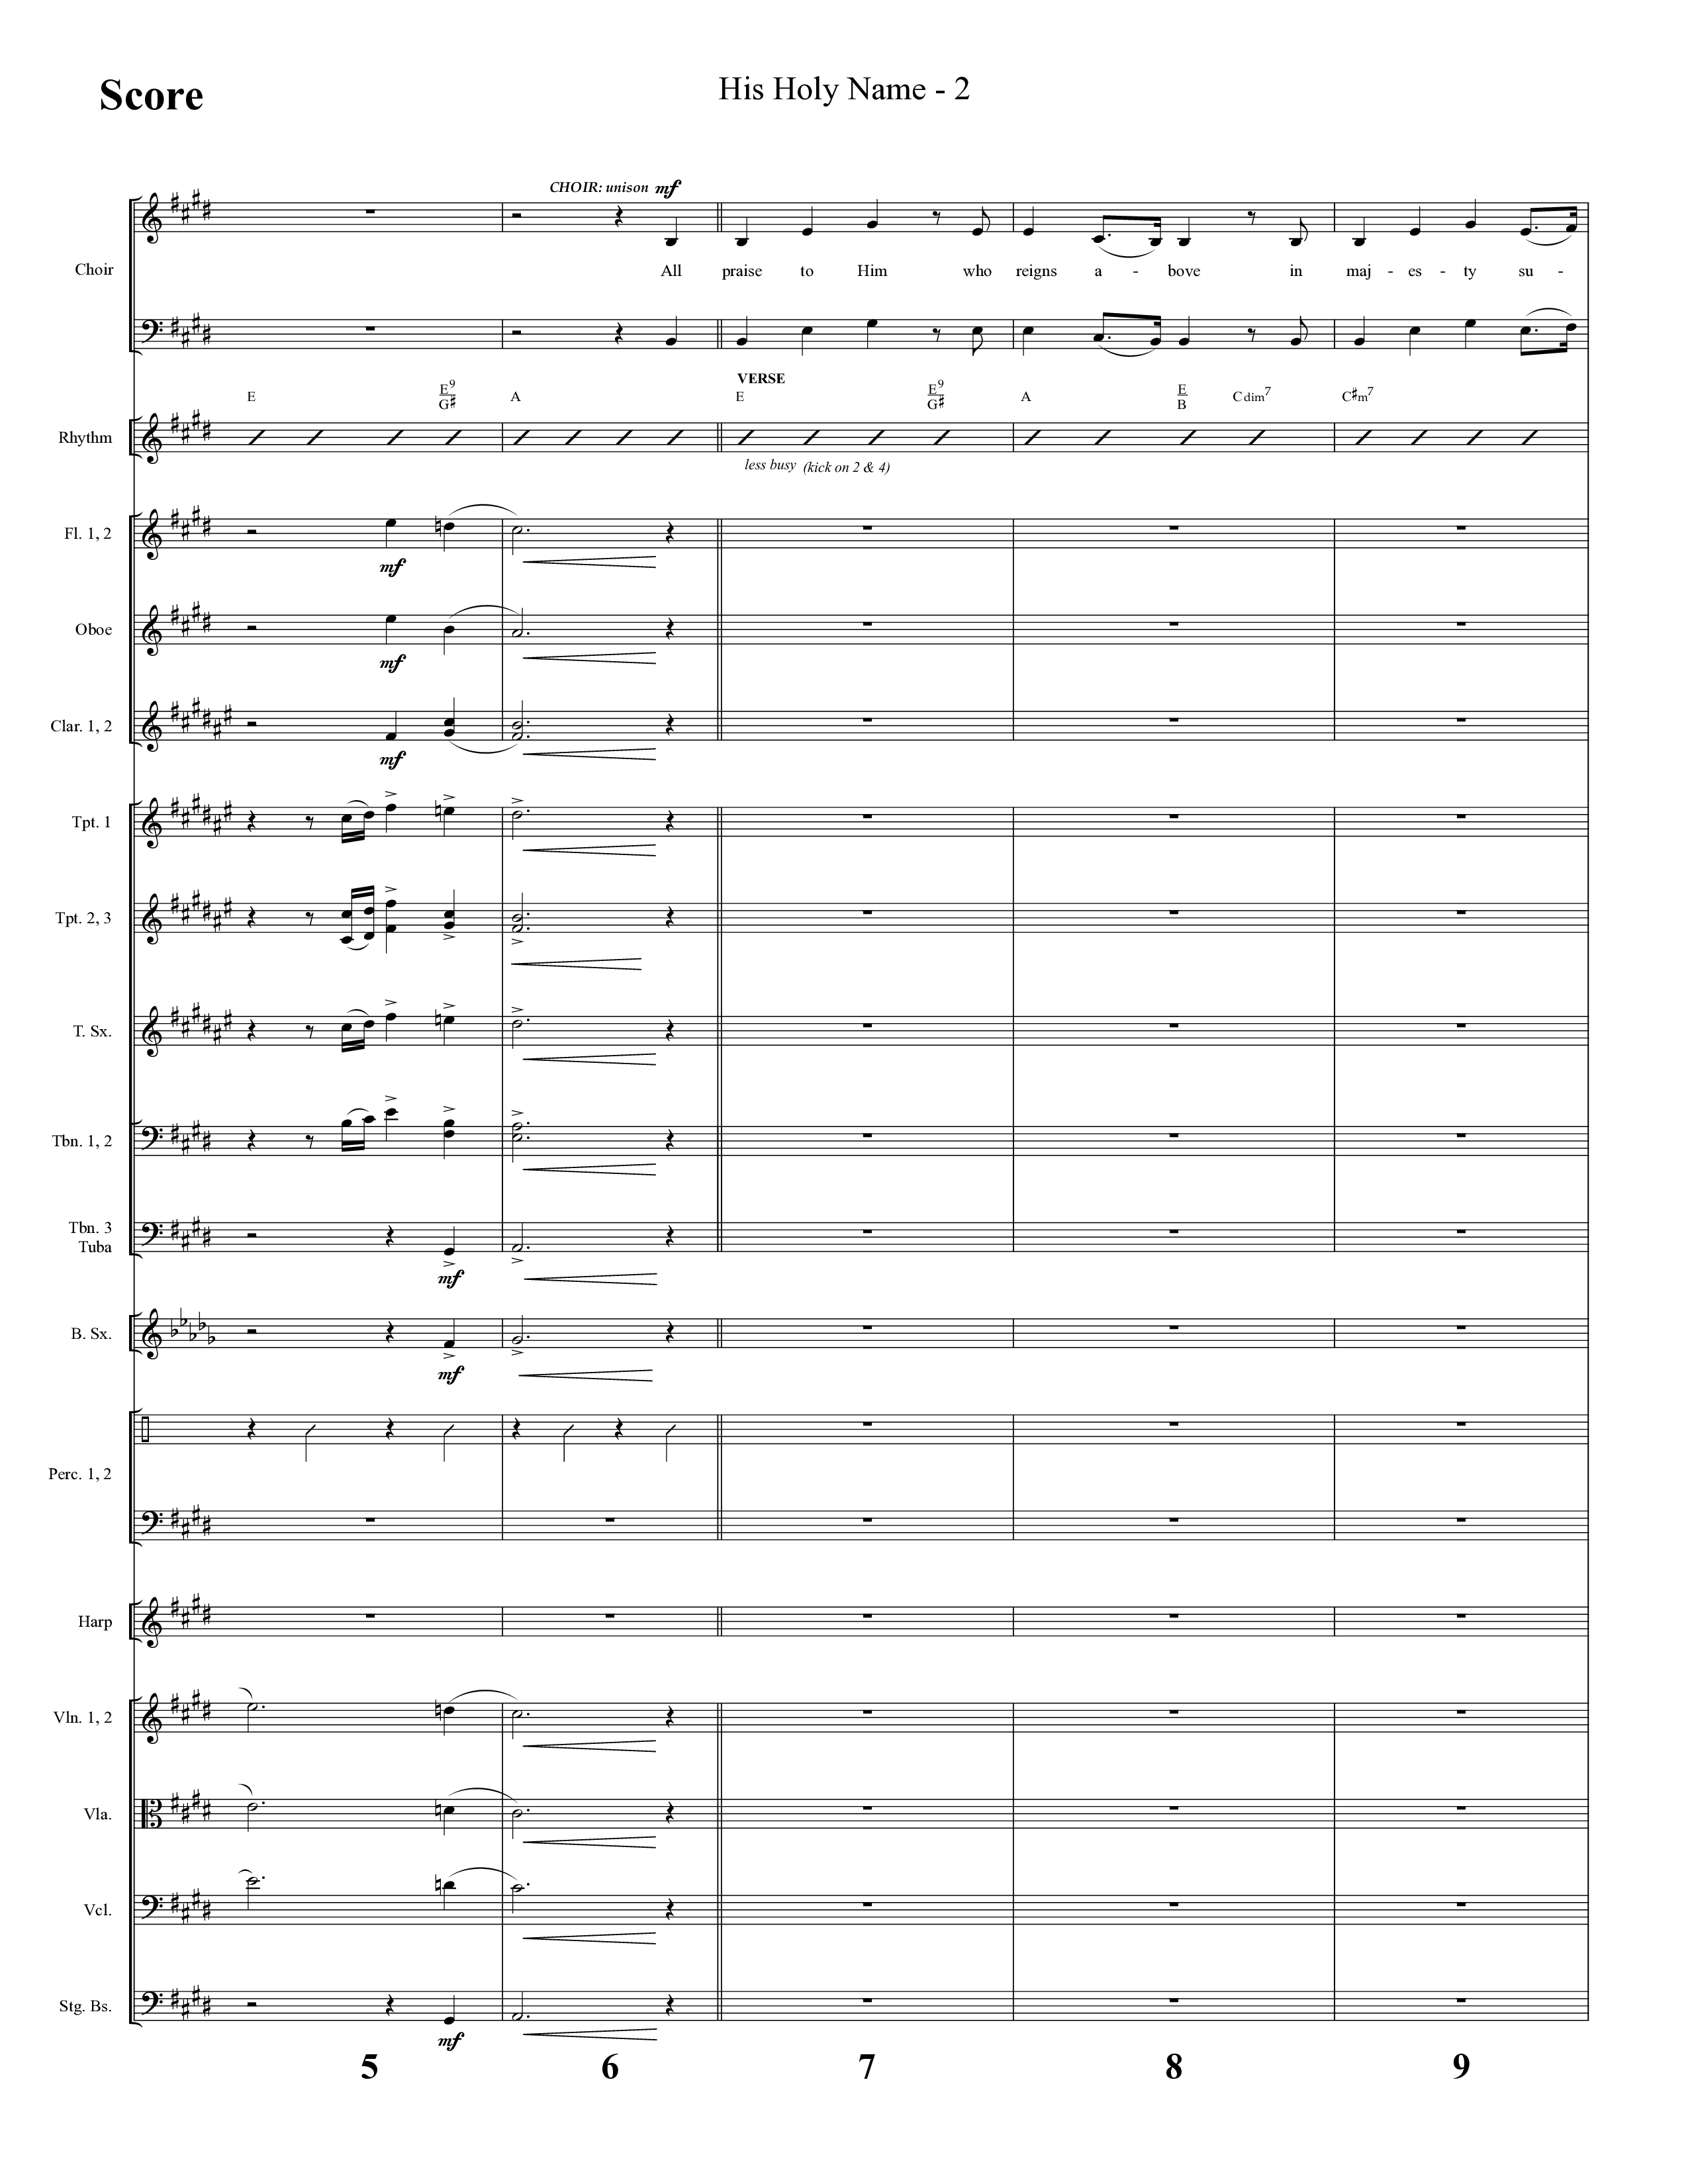 His Holy Name (with Blessed Be The Name) (Choral Anthem SATB) Conductor's Score (Lifeway Choral / Arr. Cliff Duren)